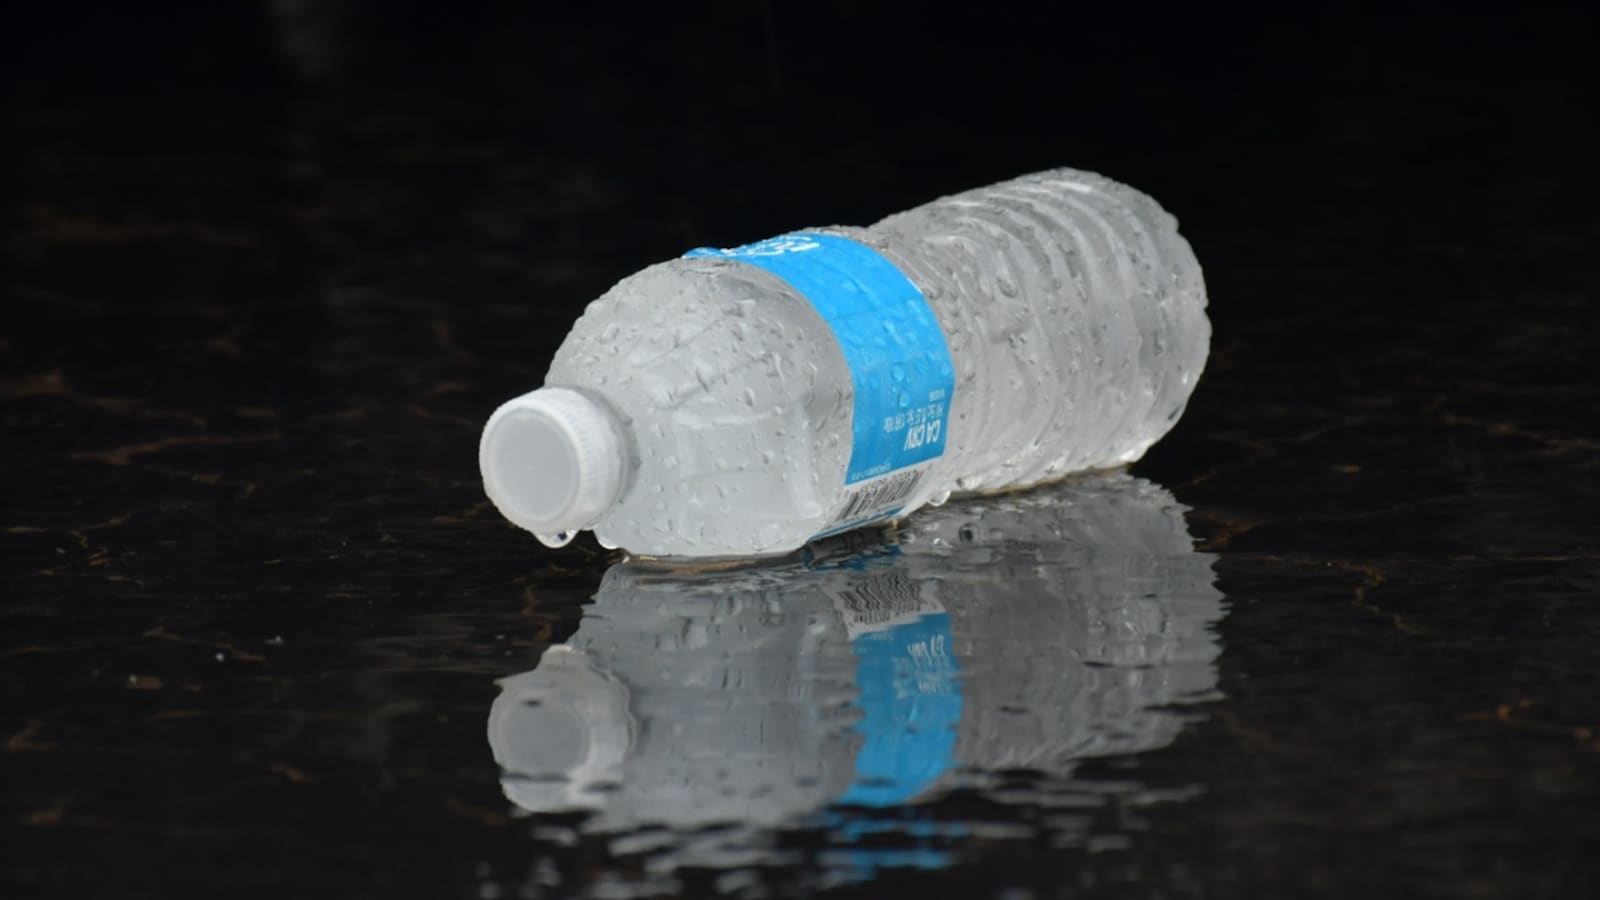 Average Liter of Bottled Water Contains 240,000 'Toxic' Plastic Particles